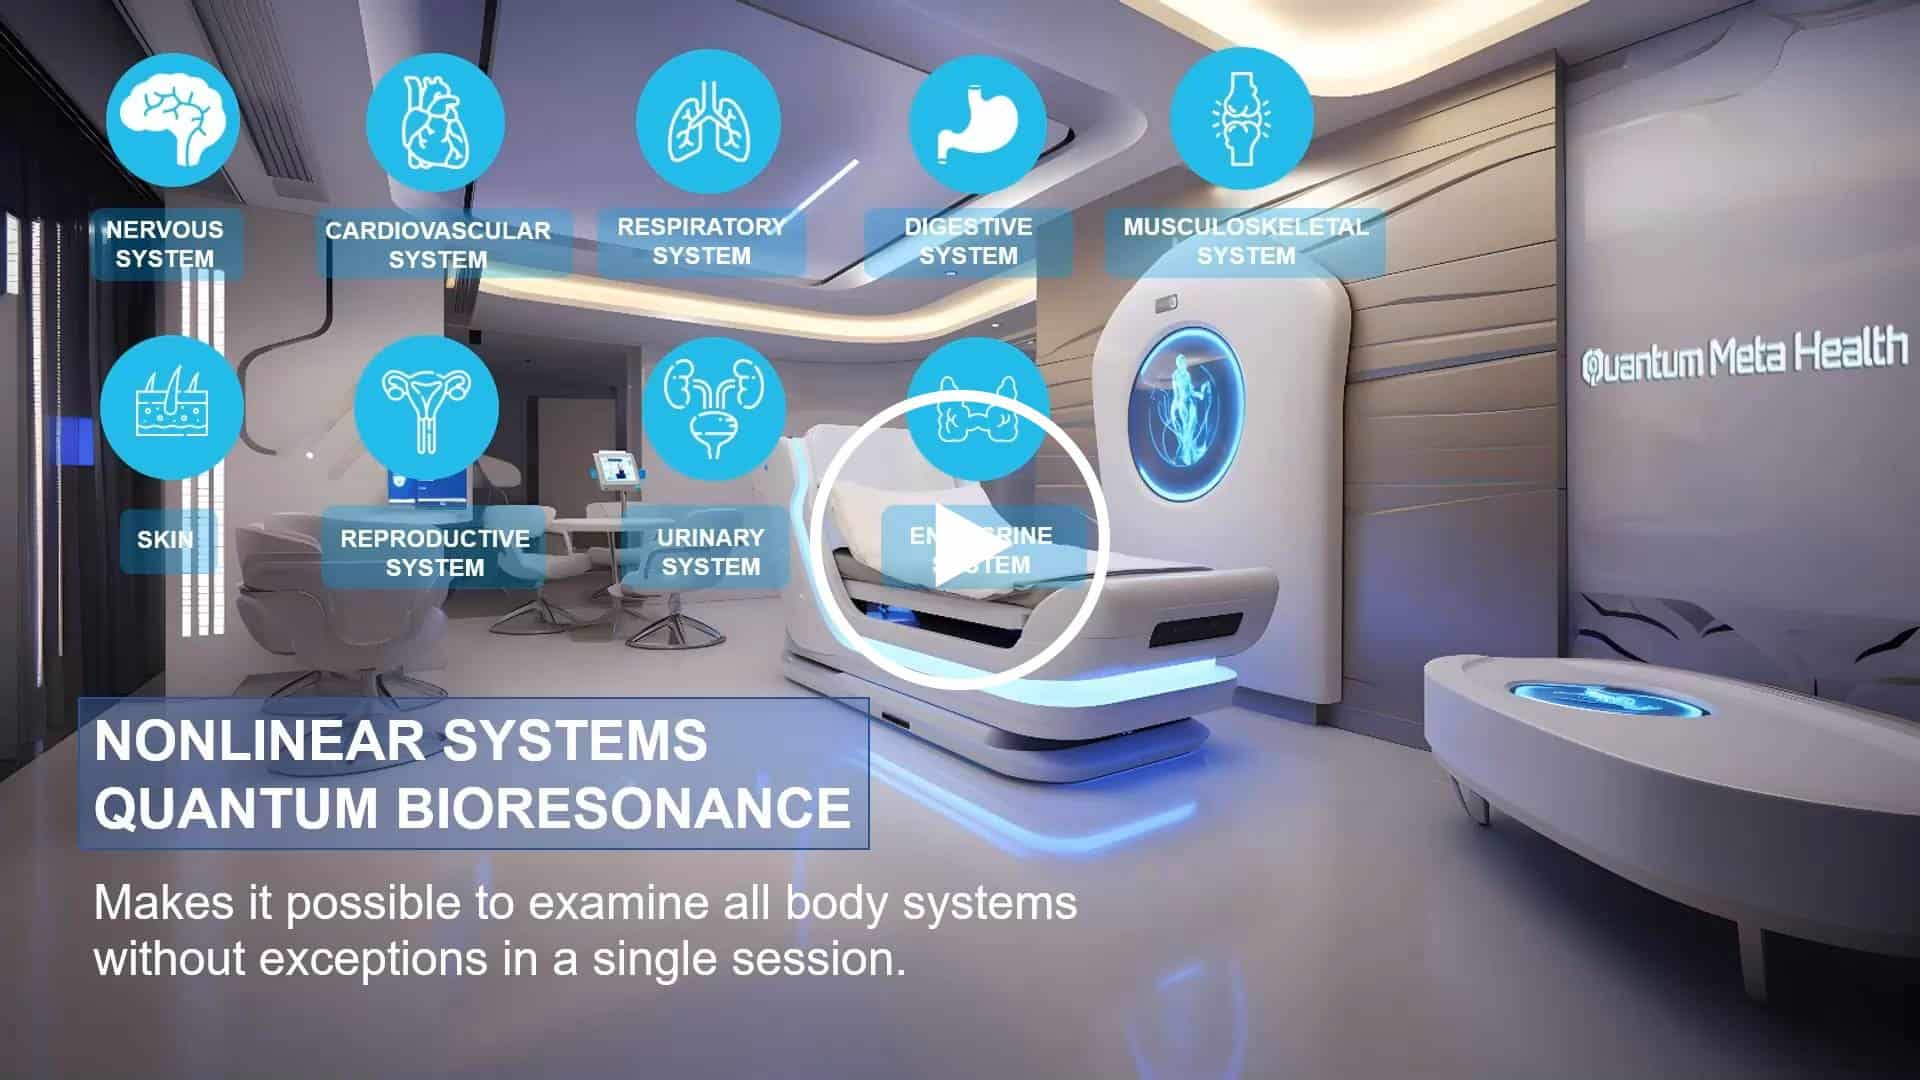 The image showcases an advanced diagnostic room for Quantum Meta Health, featuring state-of-the-art technology for quantum bioresonance. The room is designed with a futuristic aesthetic and includes a specialized bed or platform surrounded by interactive displays and icons representing various human body systems such as the nervous, cardiovascular, respiratory, and musculoskeletal systems. The setting highlights the capability of the technology to examine all body systems in a single session, enhancing the efficiency and comprehensiveness of medical diagnostics. The design is sleek, modern, and clinical, suggesting a high-tech approach to health care.